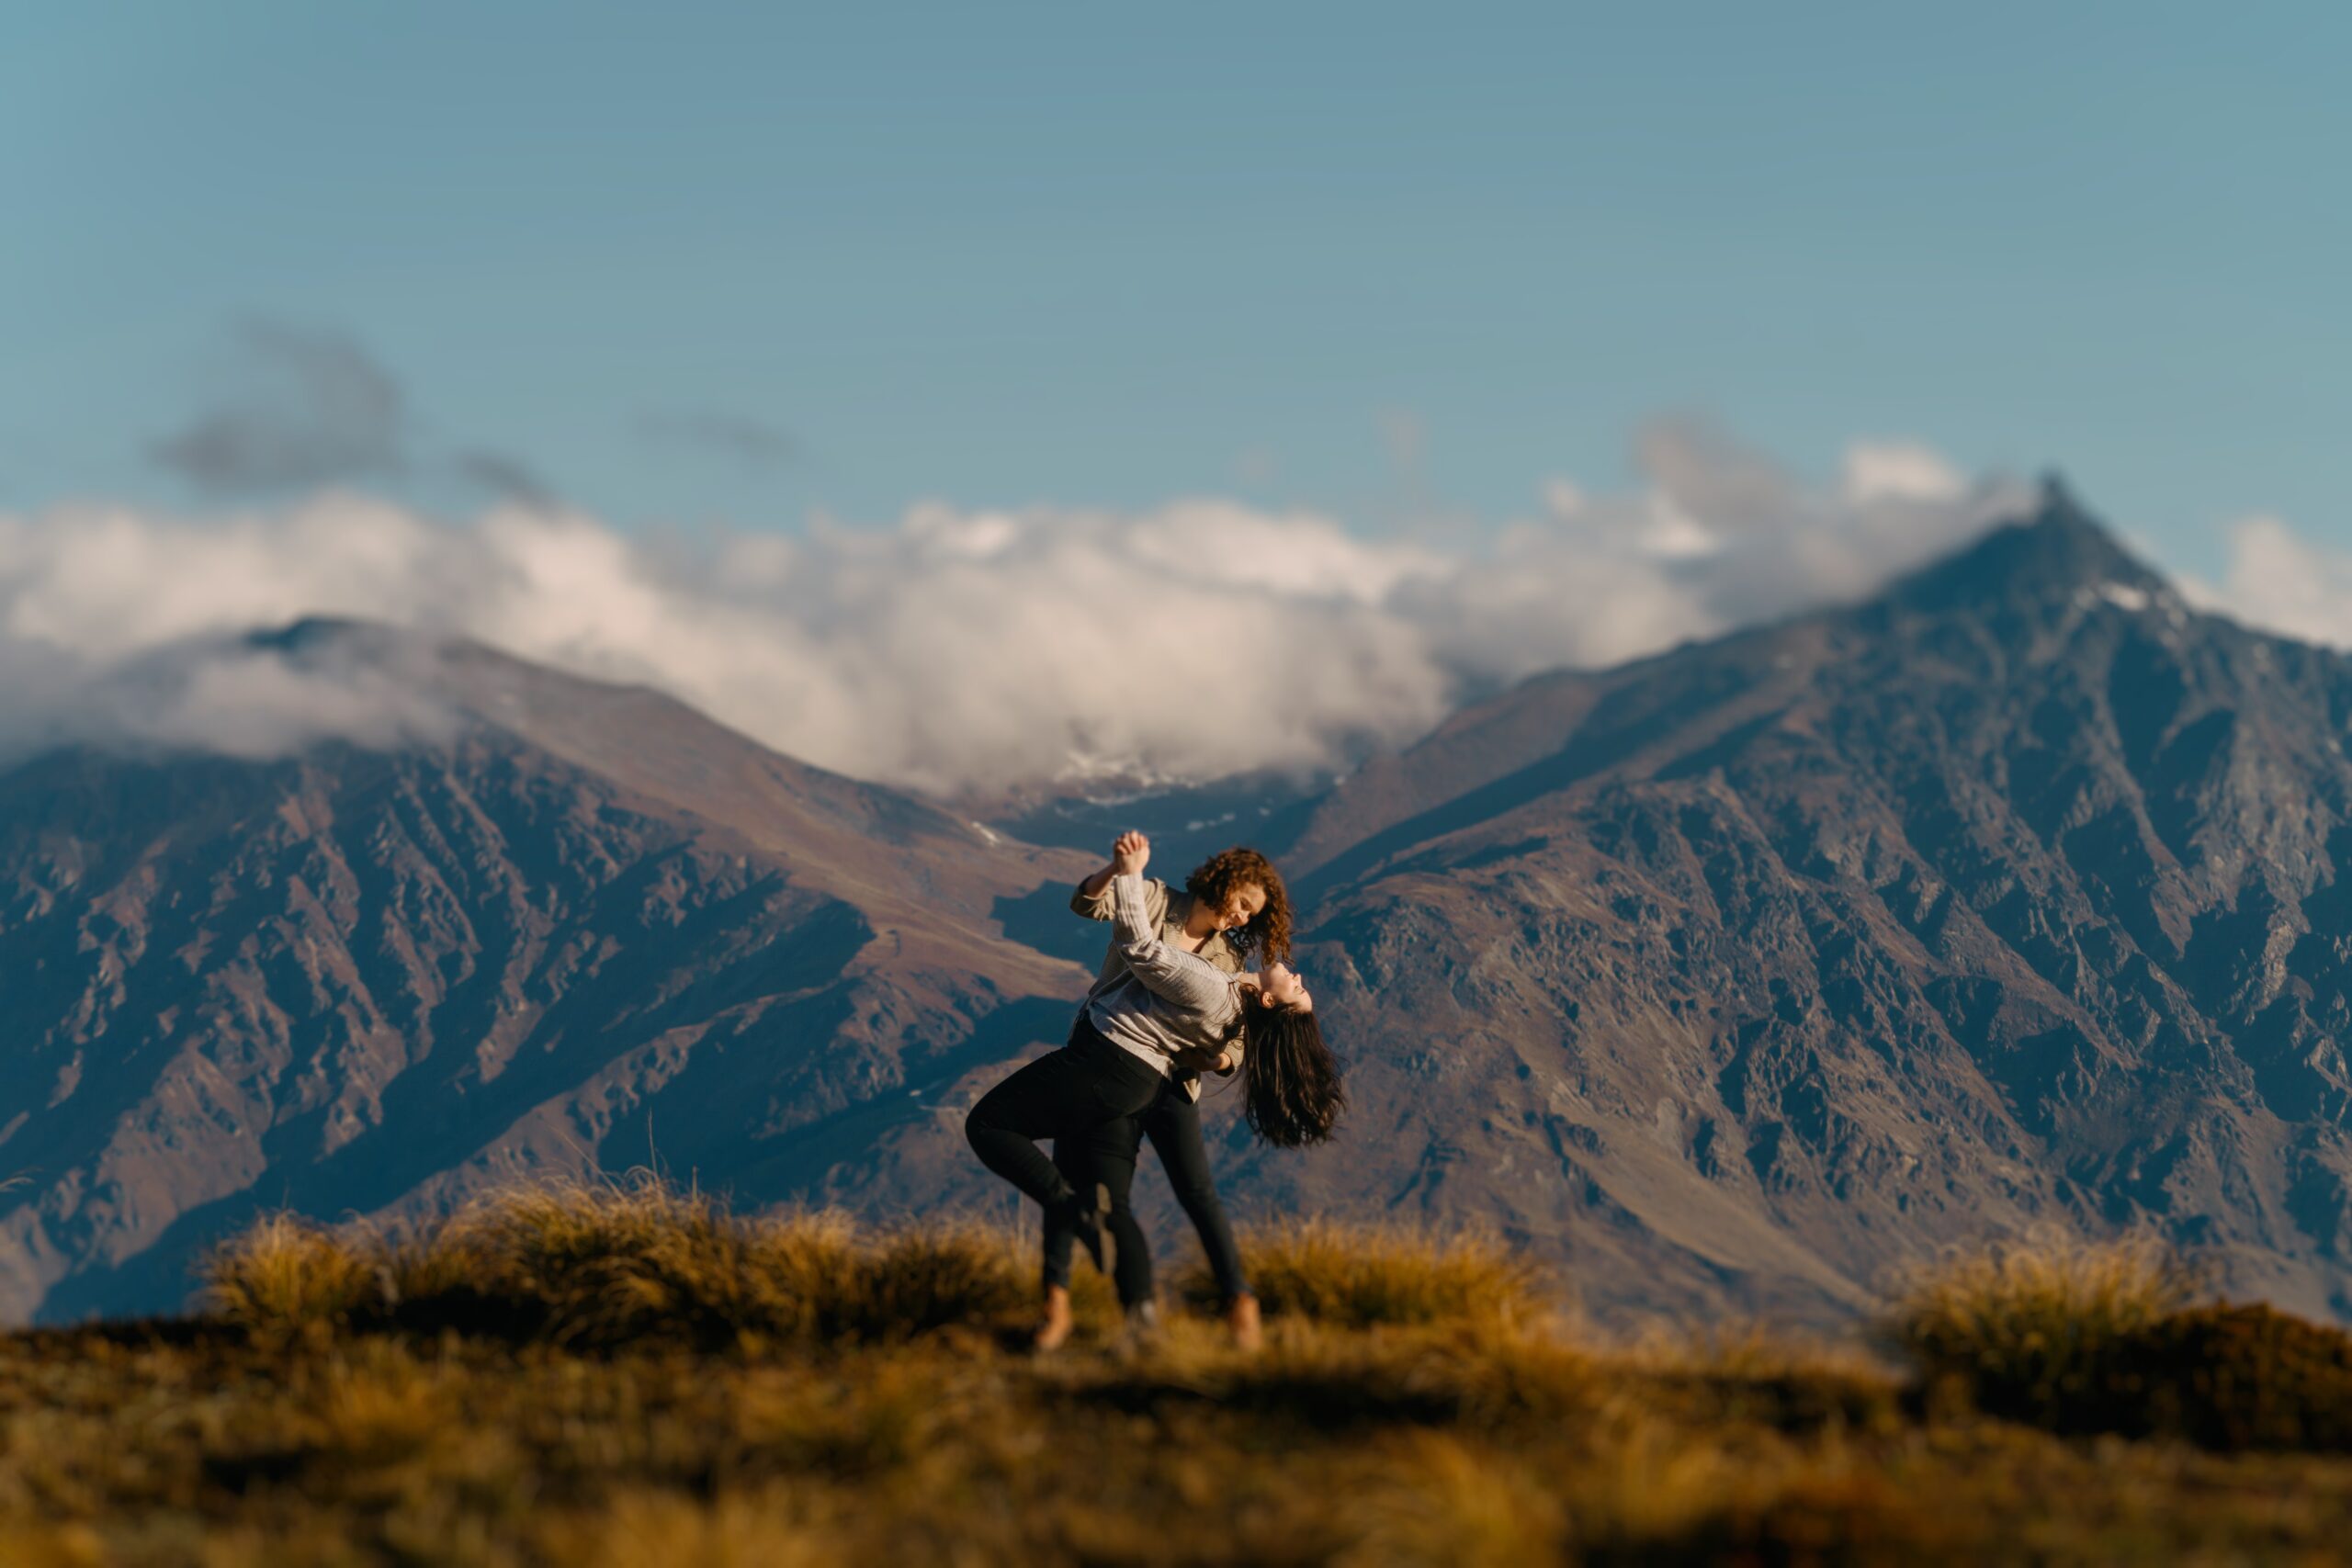 Honeymoon photoshoot with remarkables in the backdrop